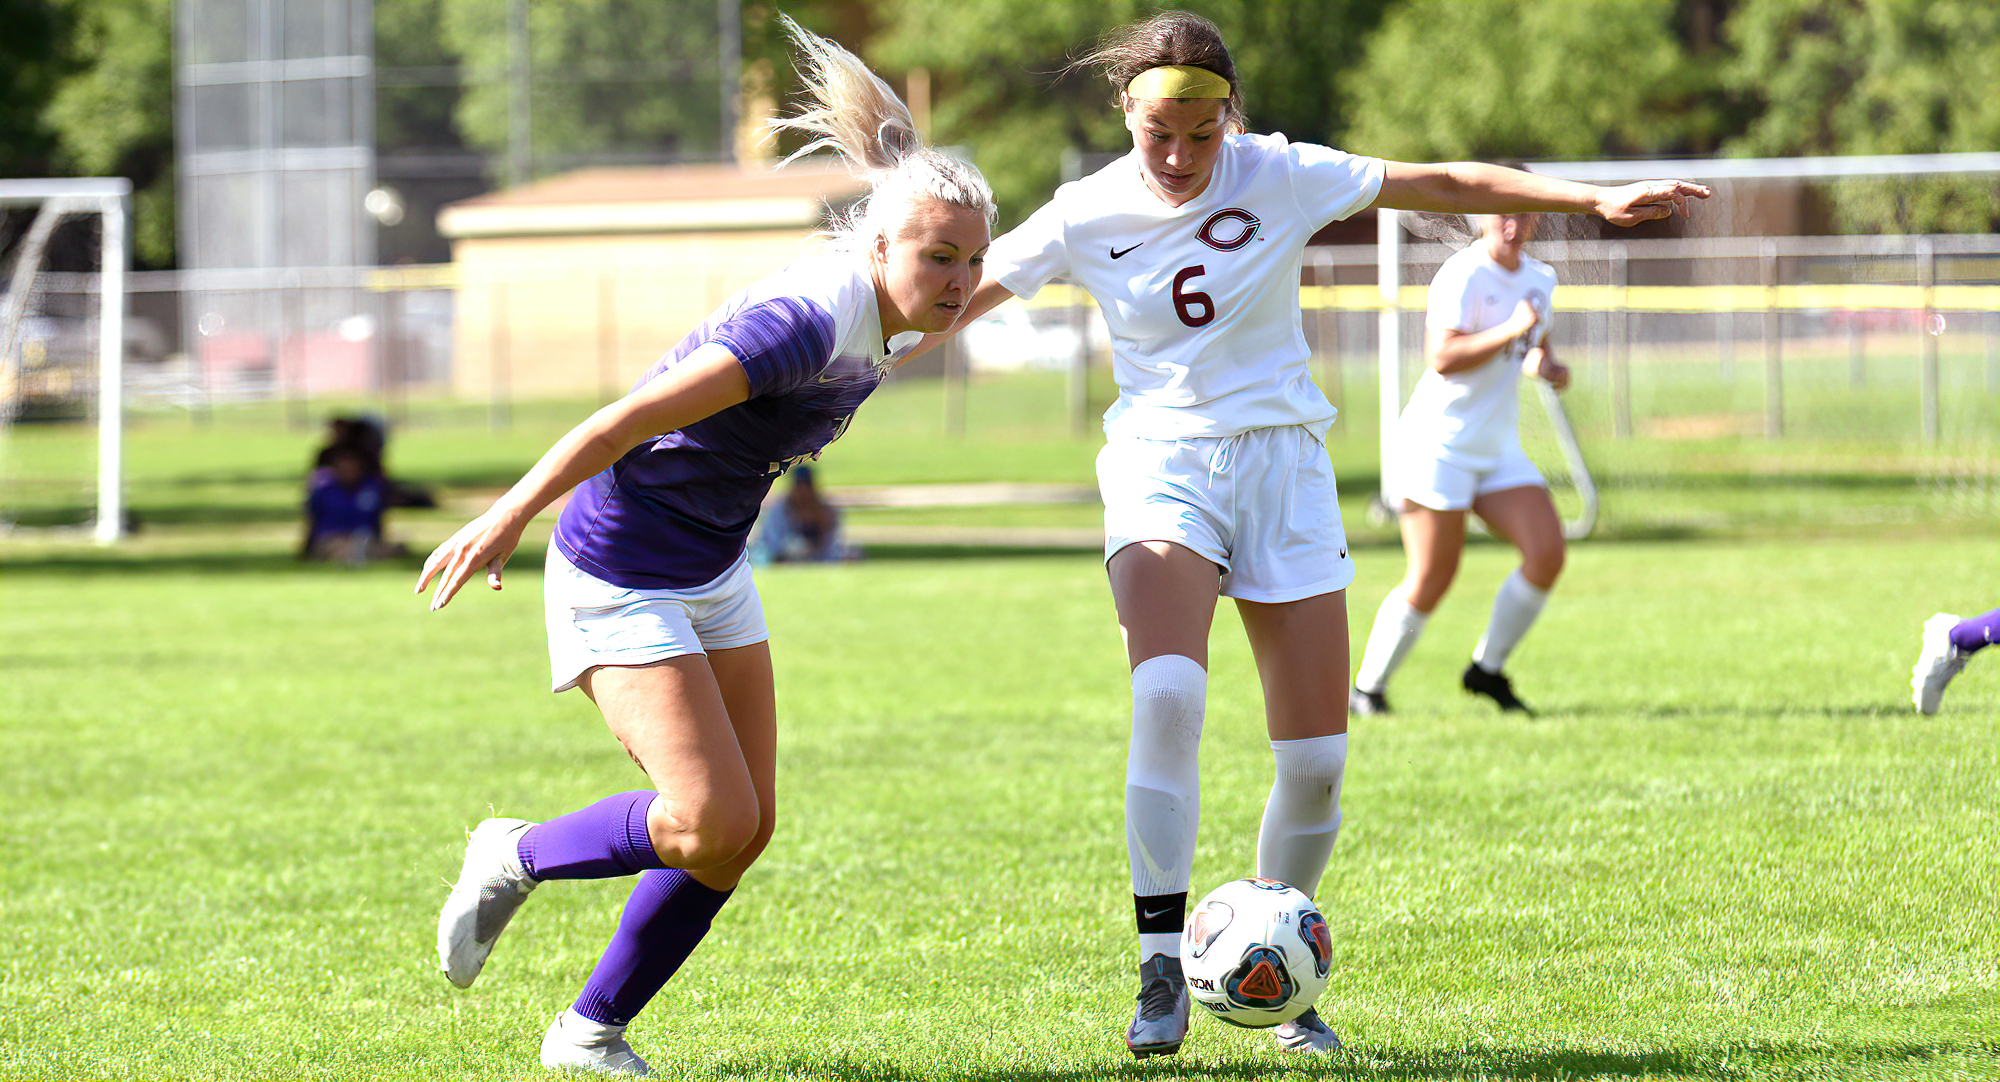 Sammy Holmberg scored the lone goal for the Cobbers in their game at Carleton. She now has five goals this year which is tied for fourth in the MIAC.